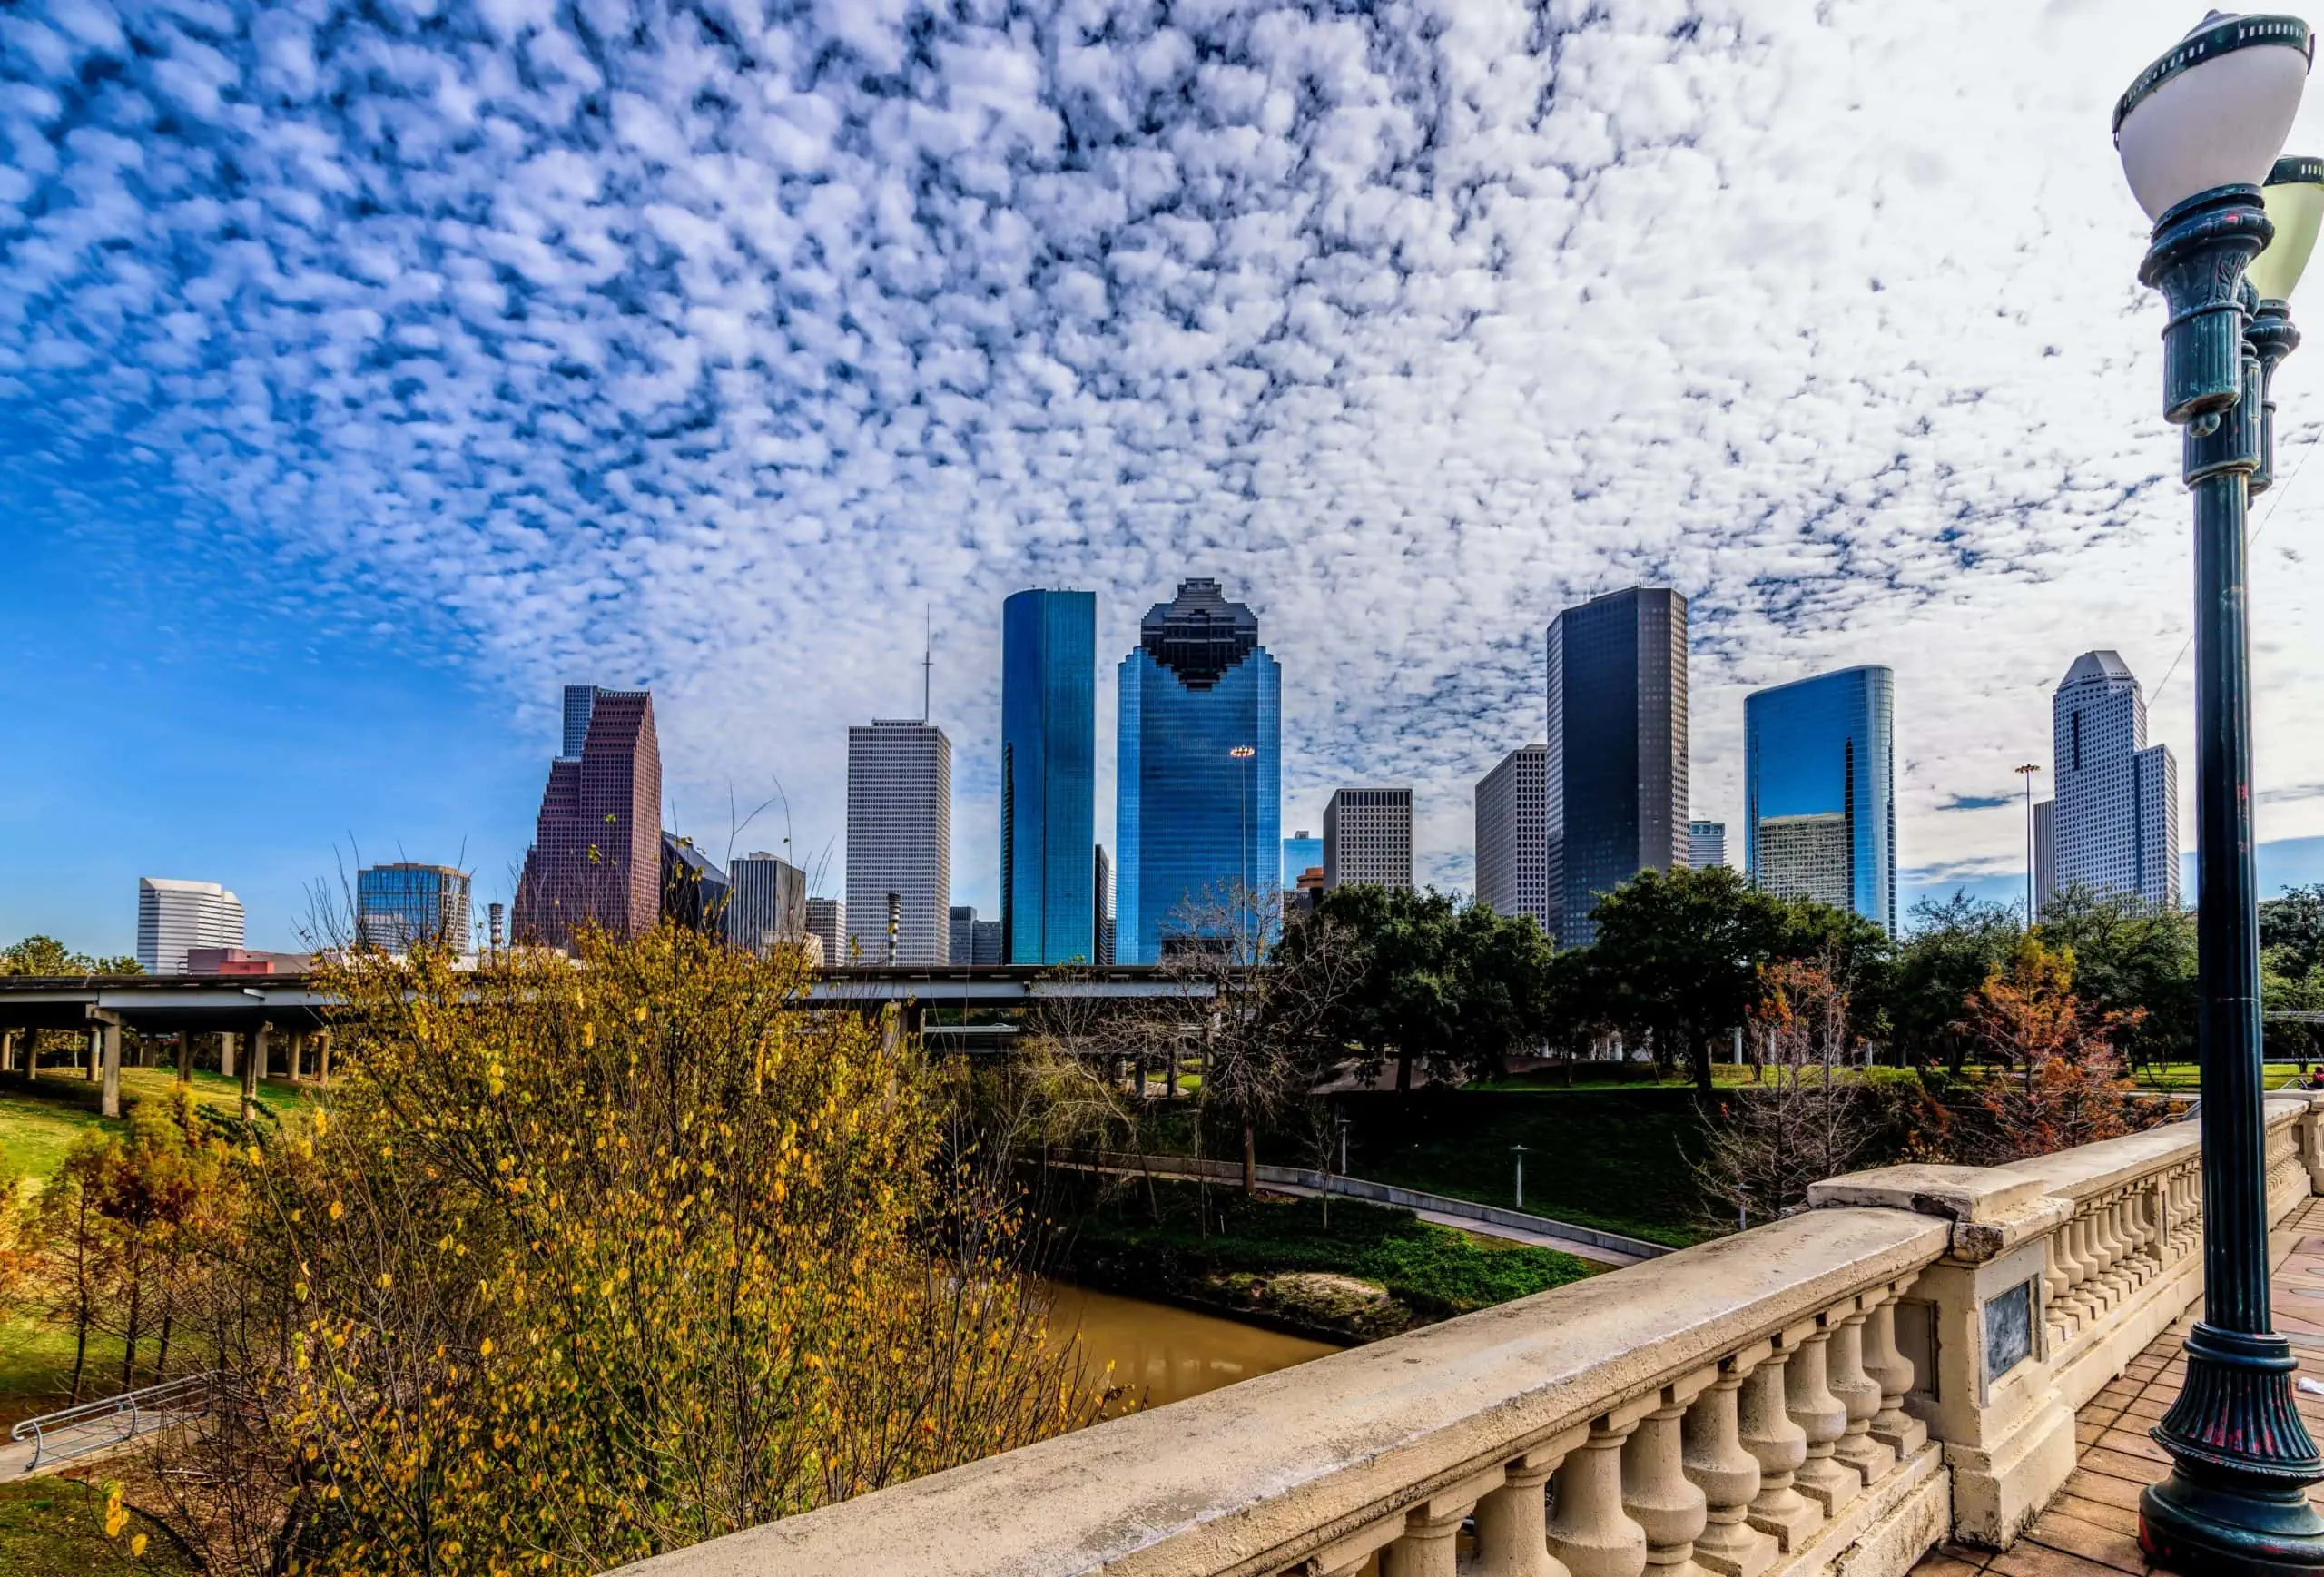 Skyline of Houston with businesses that are protected by security cameras